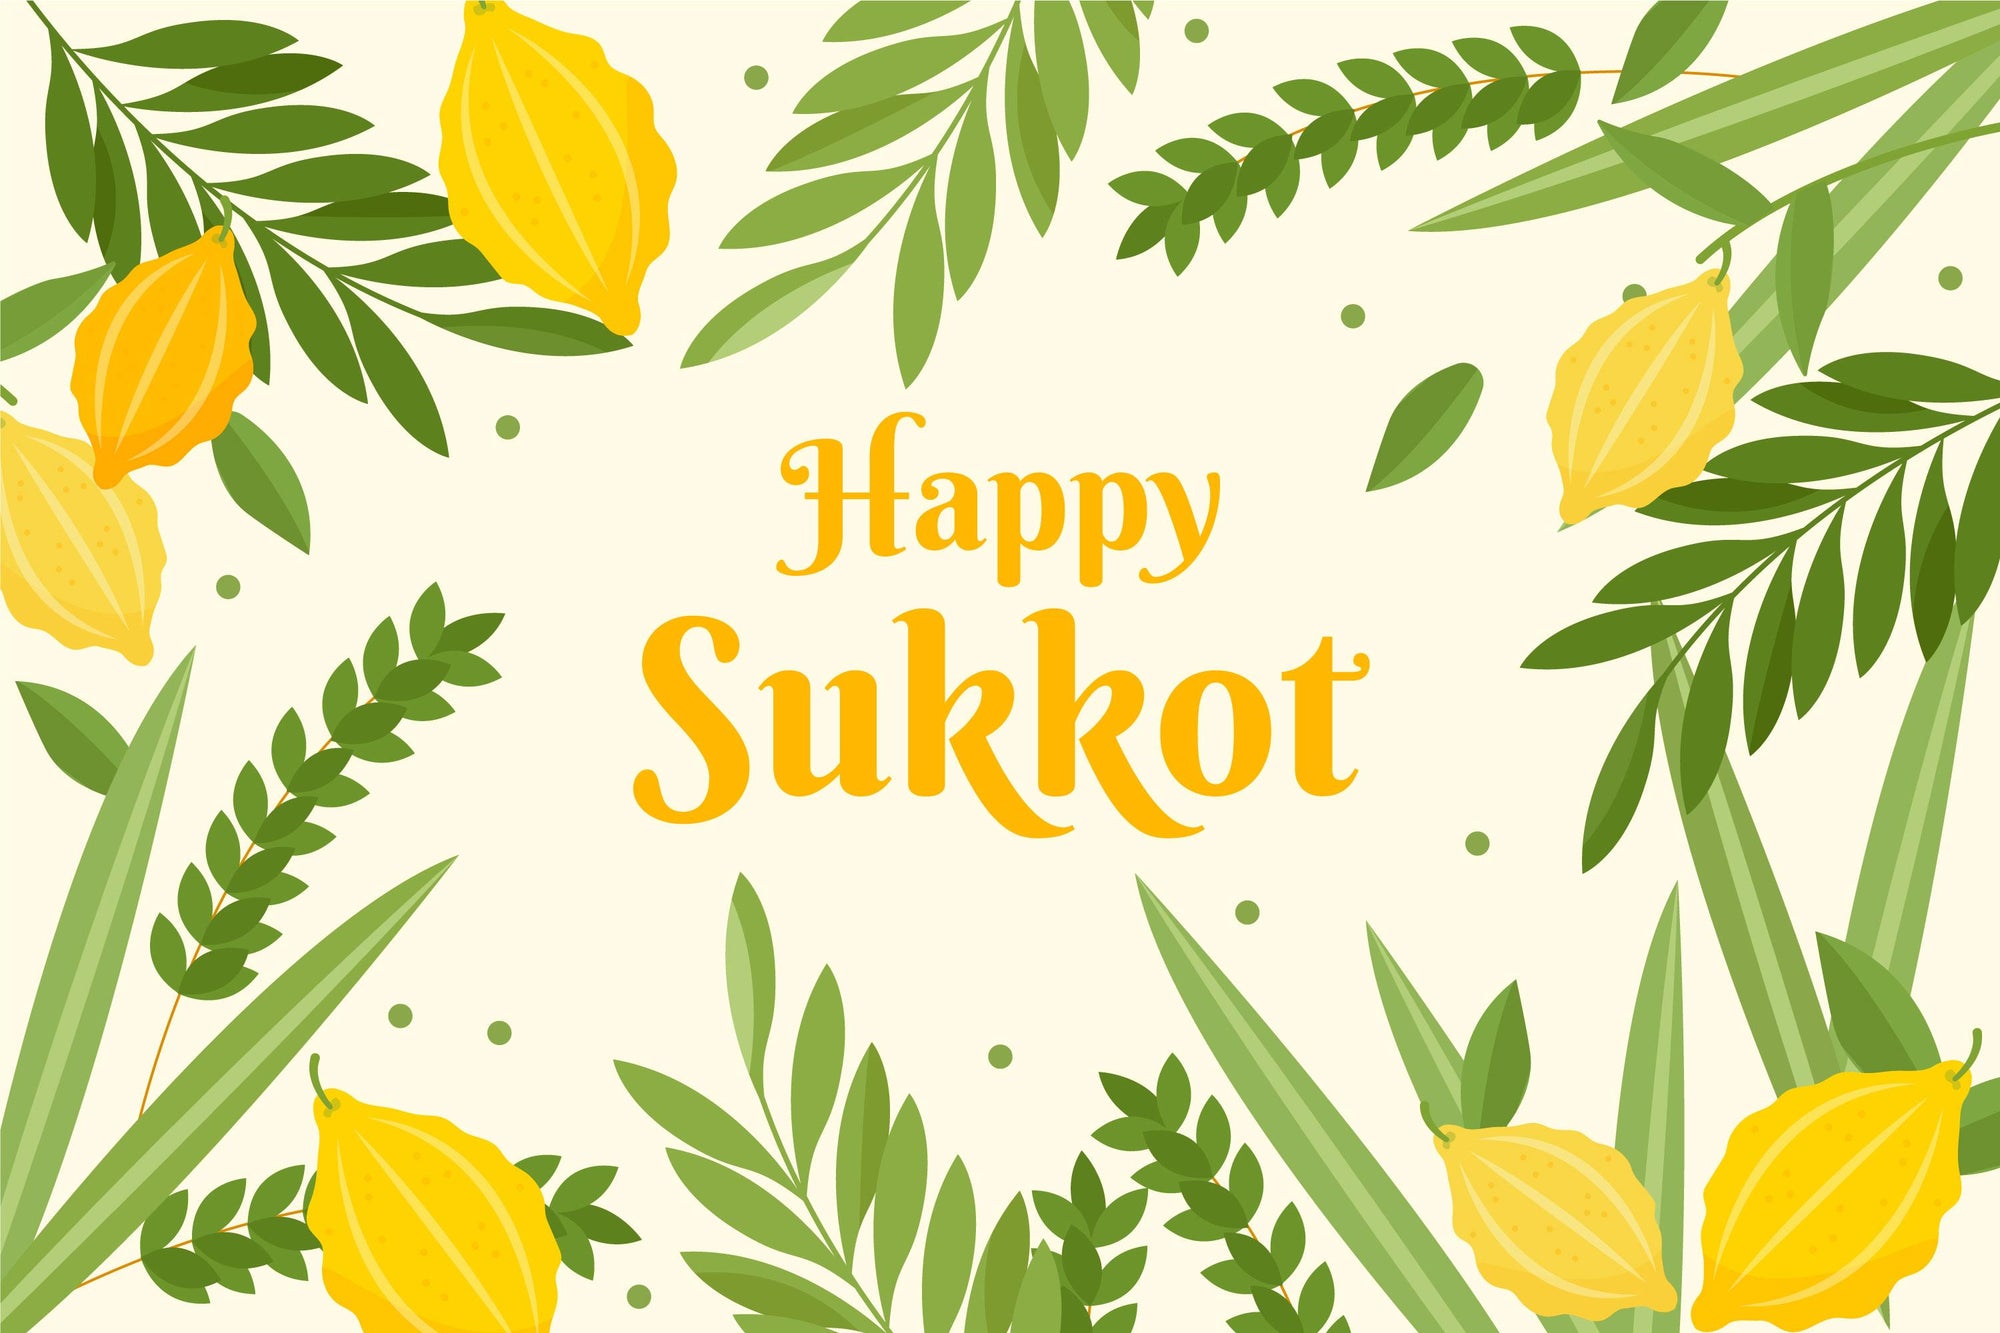 CITIBIN Home For the Holidays: First Up, Sukkot!